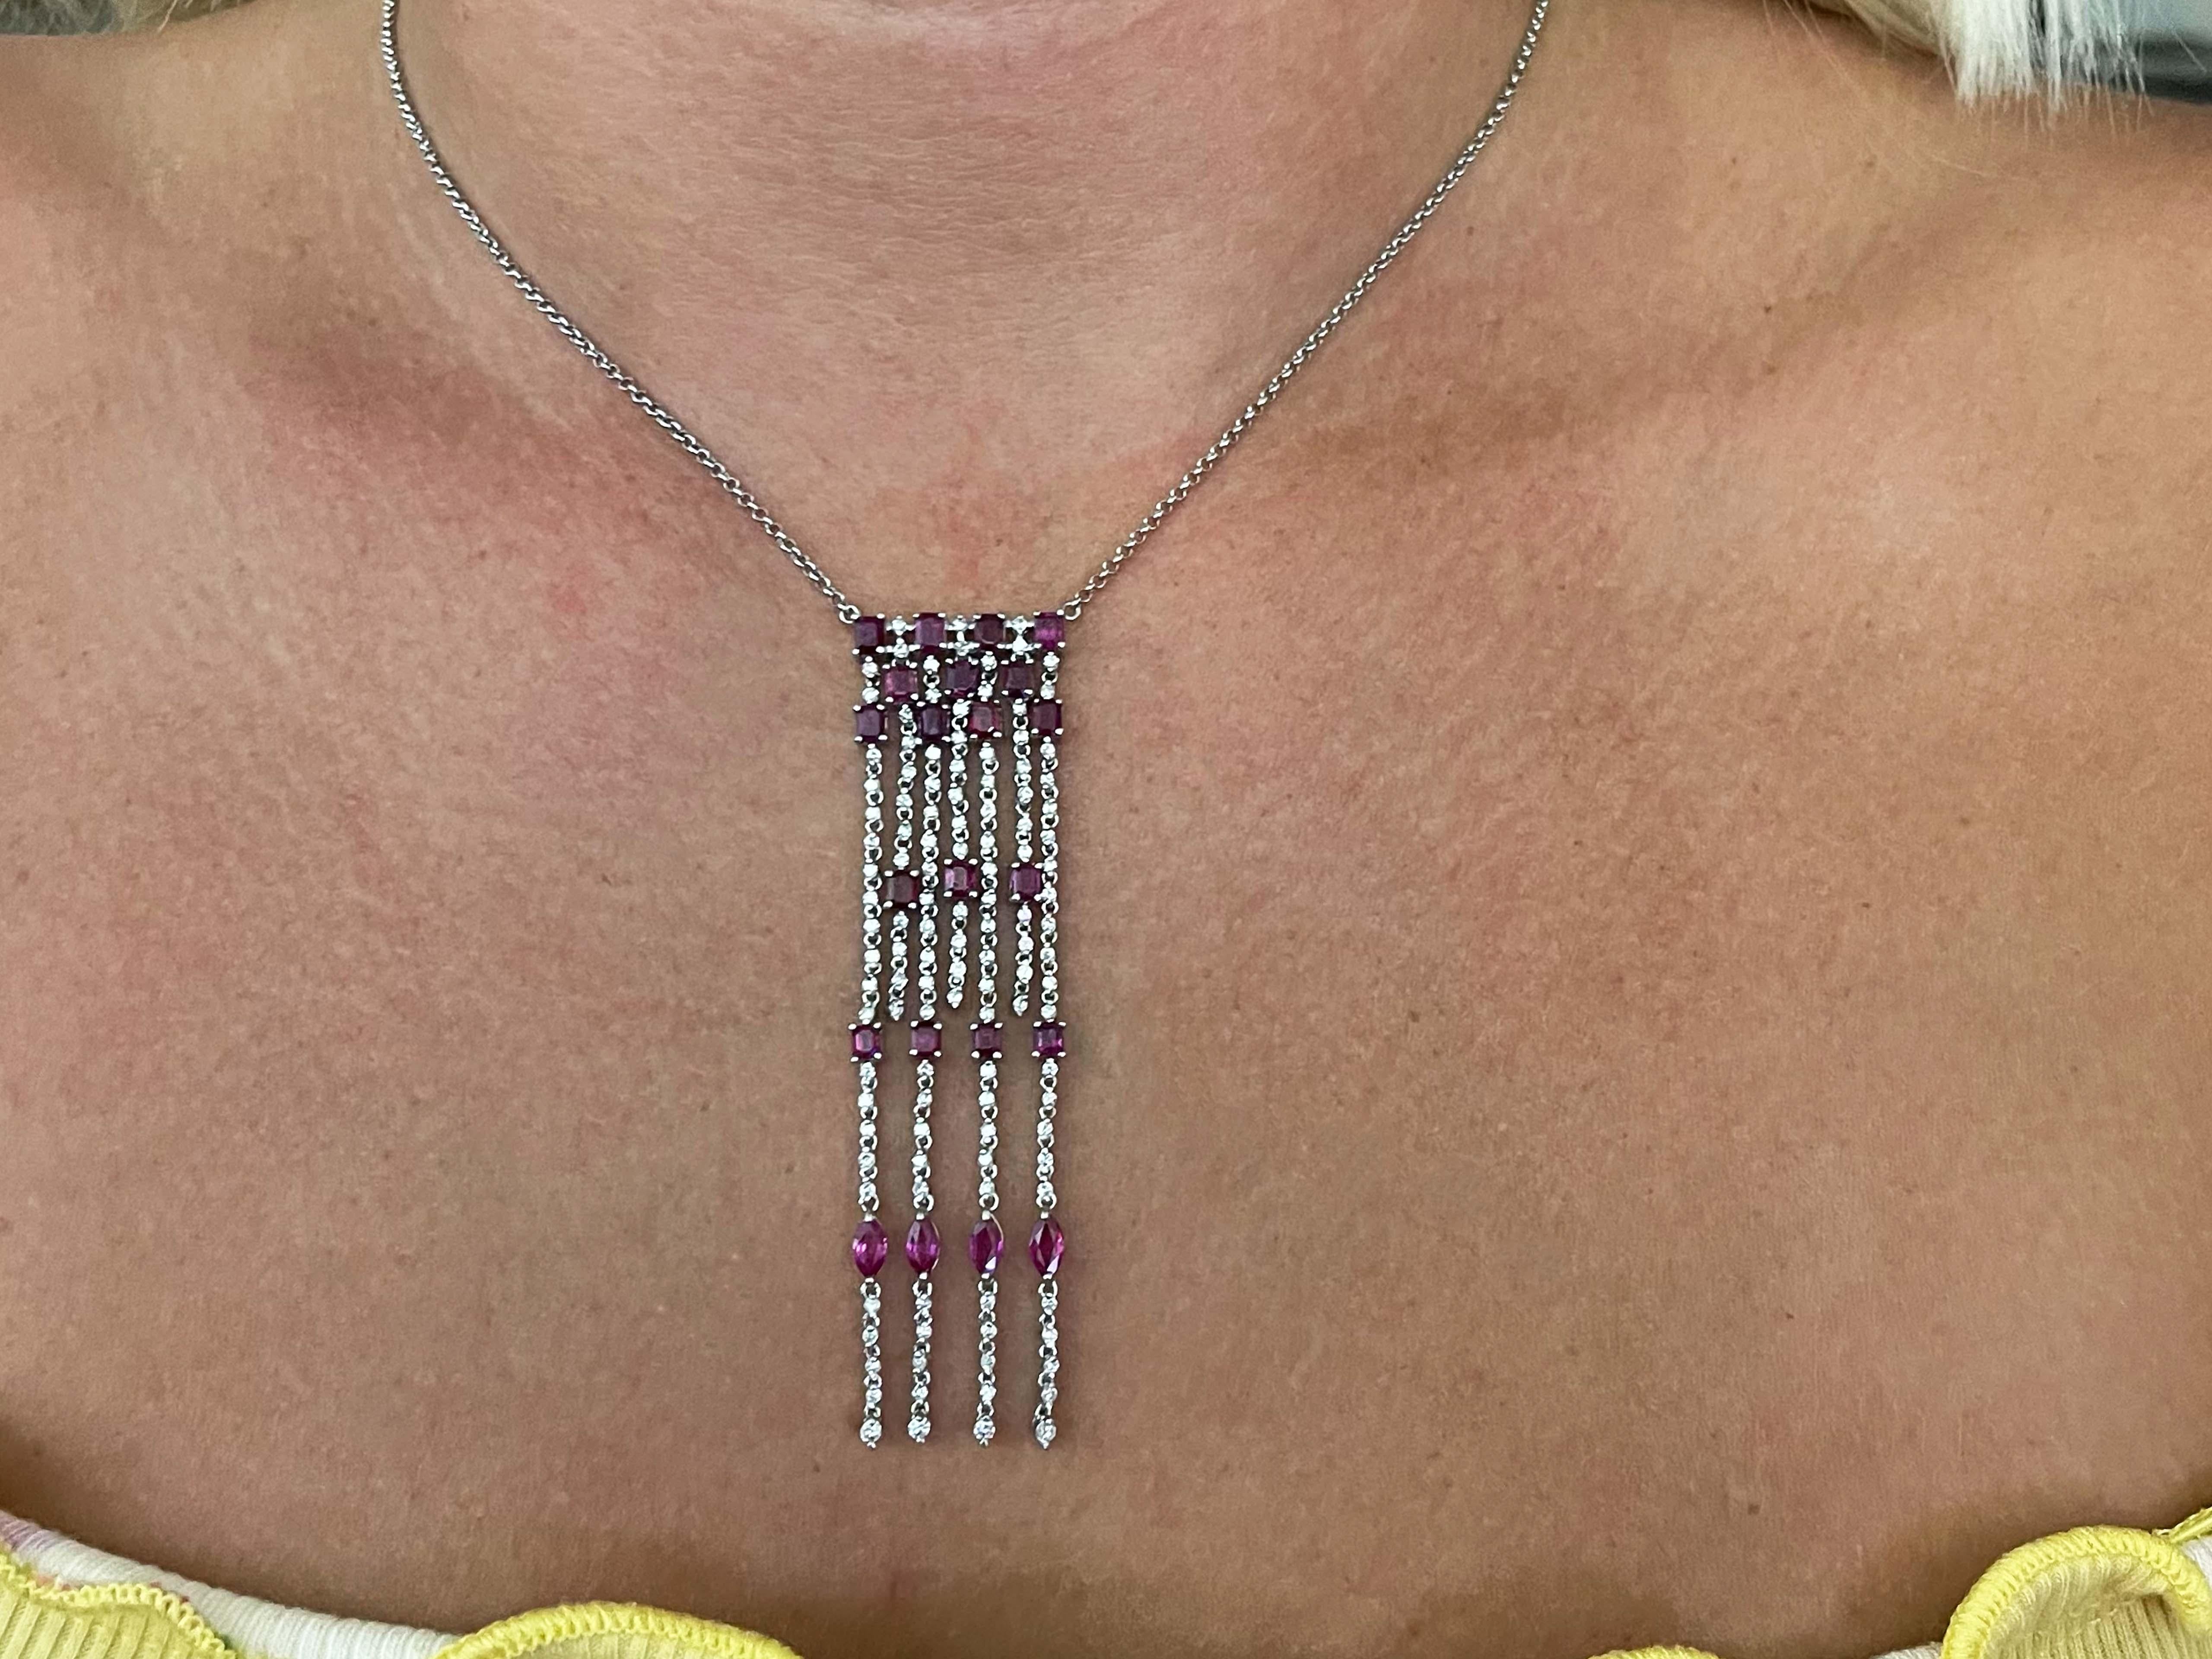 This jaw dropping necklace features 2.5 carats of red rubies and 1.30 carats of brilliant cut diamonds.  The diamonds are G in color, VS in clarity. The pendant is approximately 3